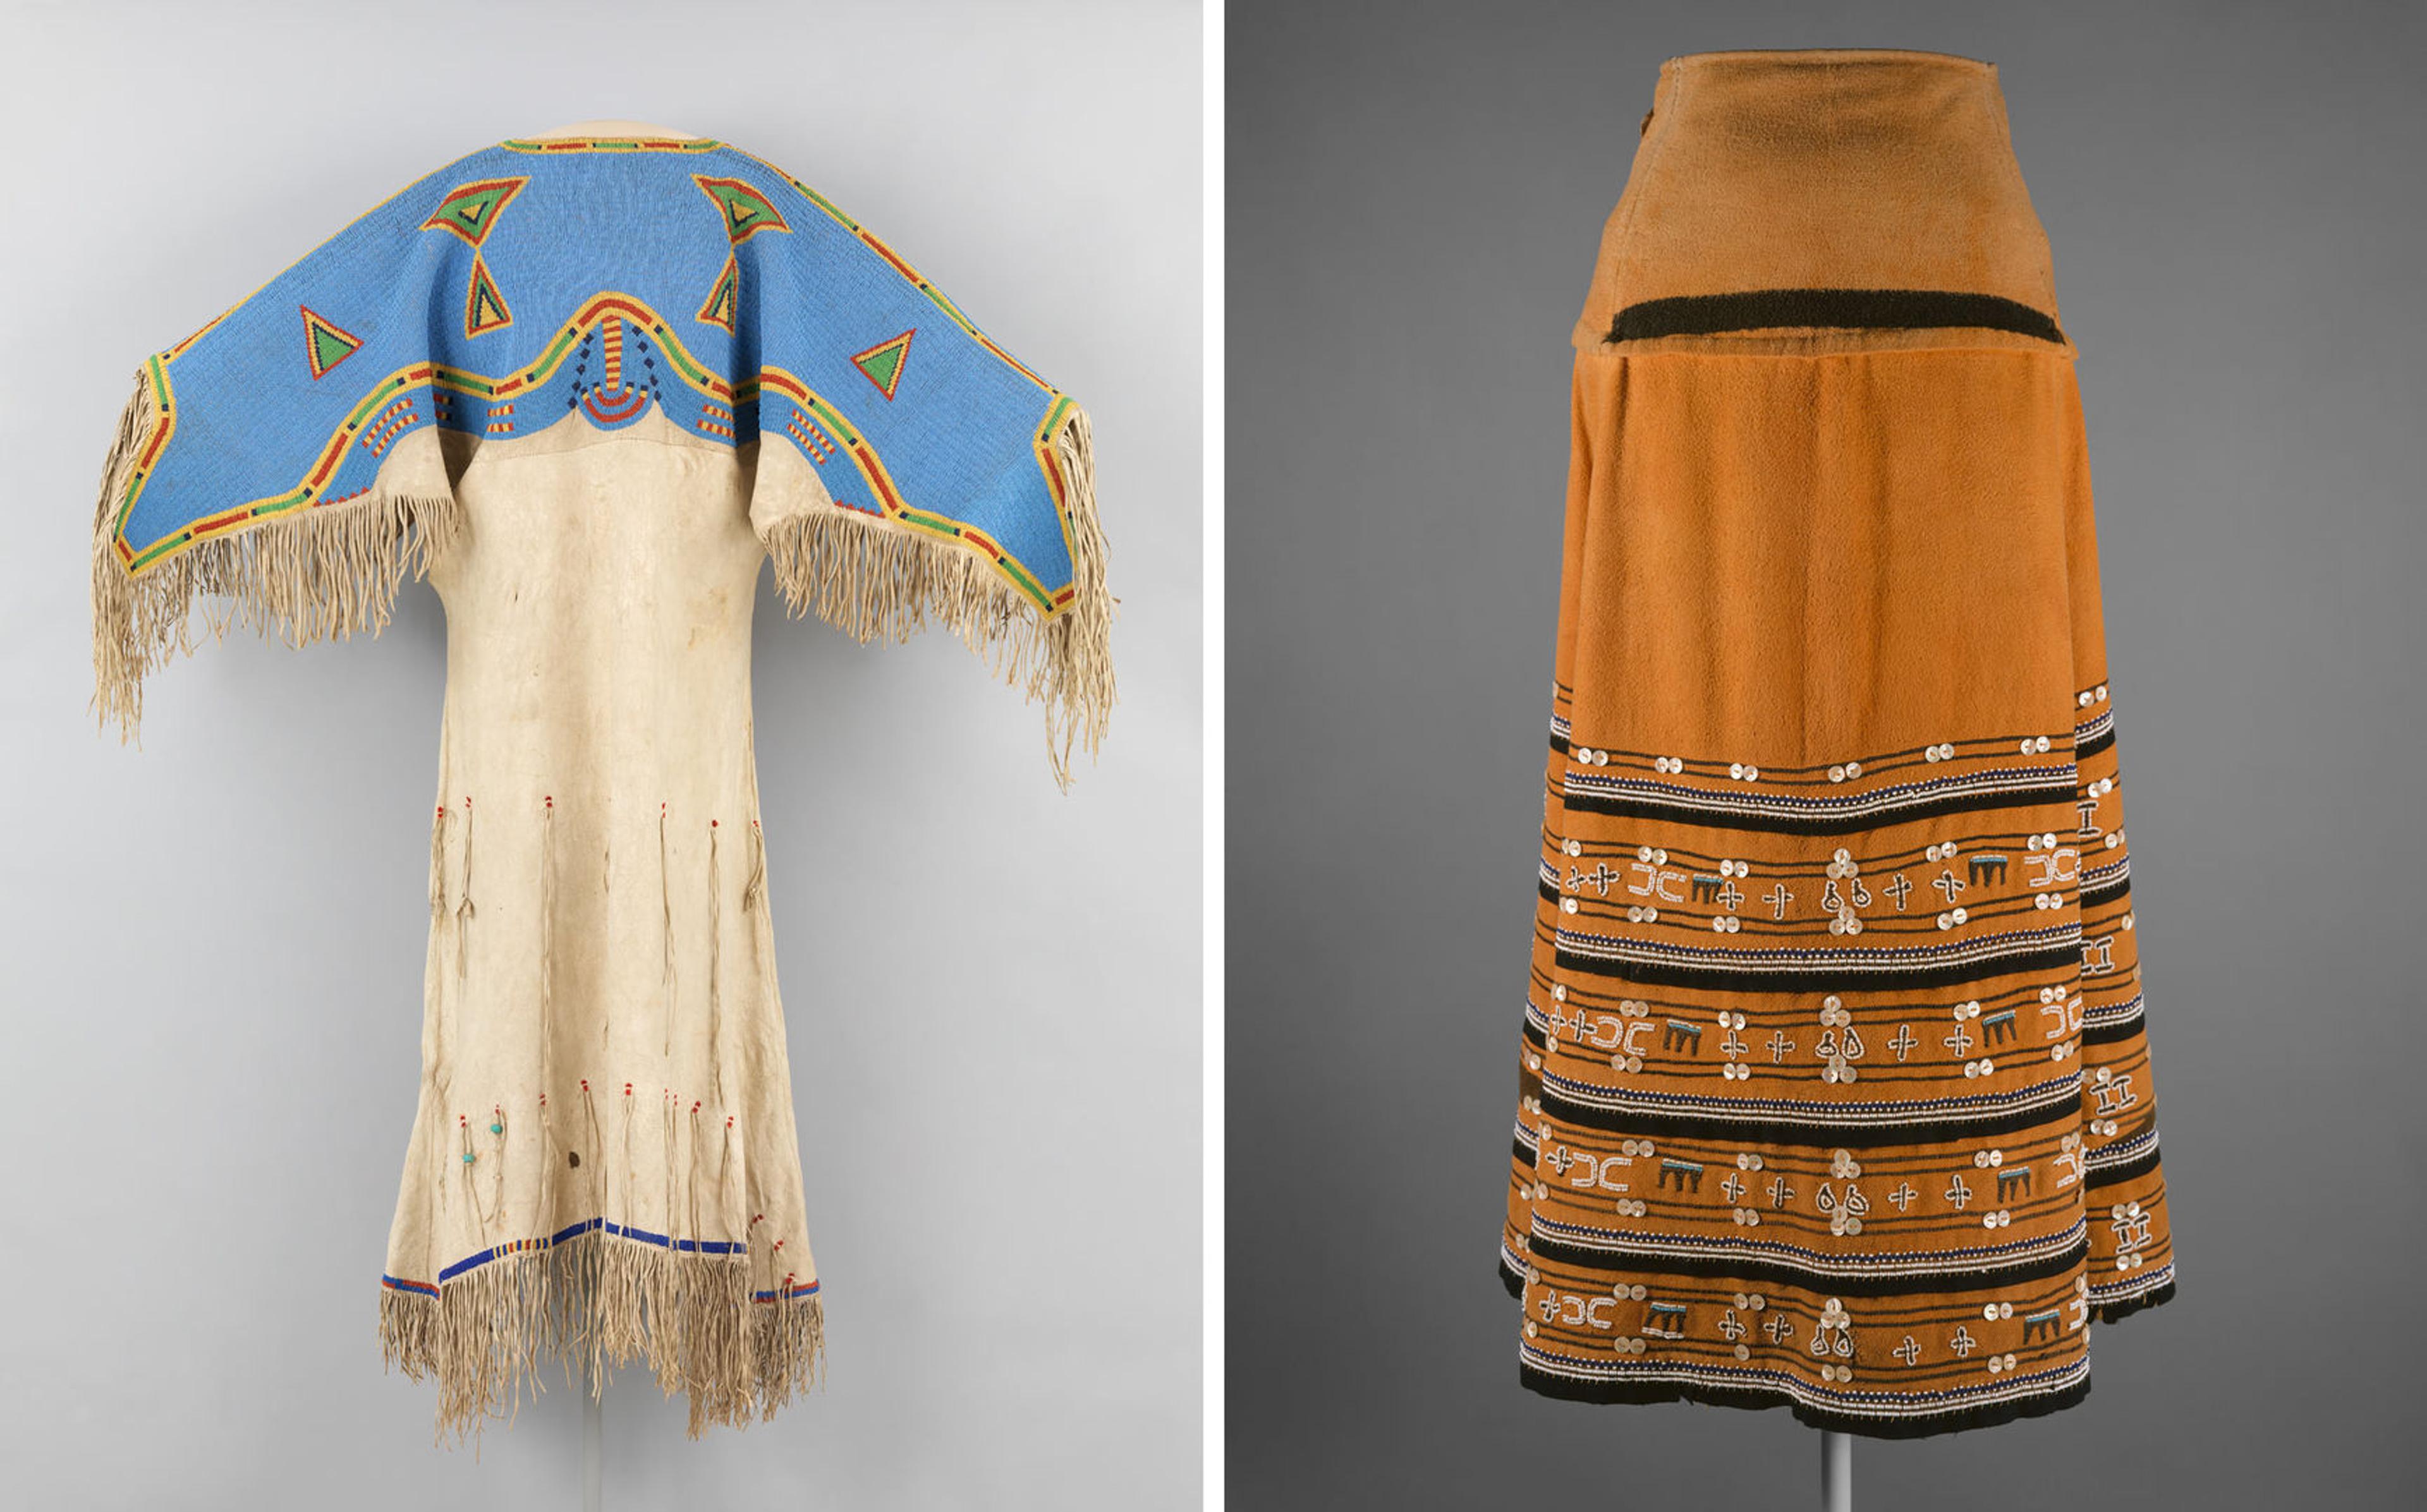 At left, a woman's dress made by Sioux artisans in the late nineteenth century; at right, a twentieth-century skirt made by the Xhosa or Mfengu peoples of South Africa